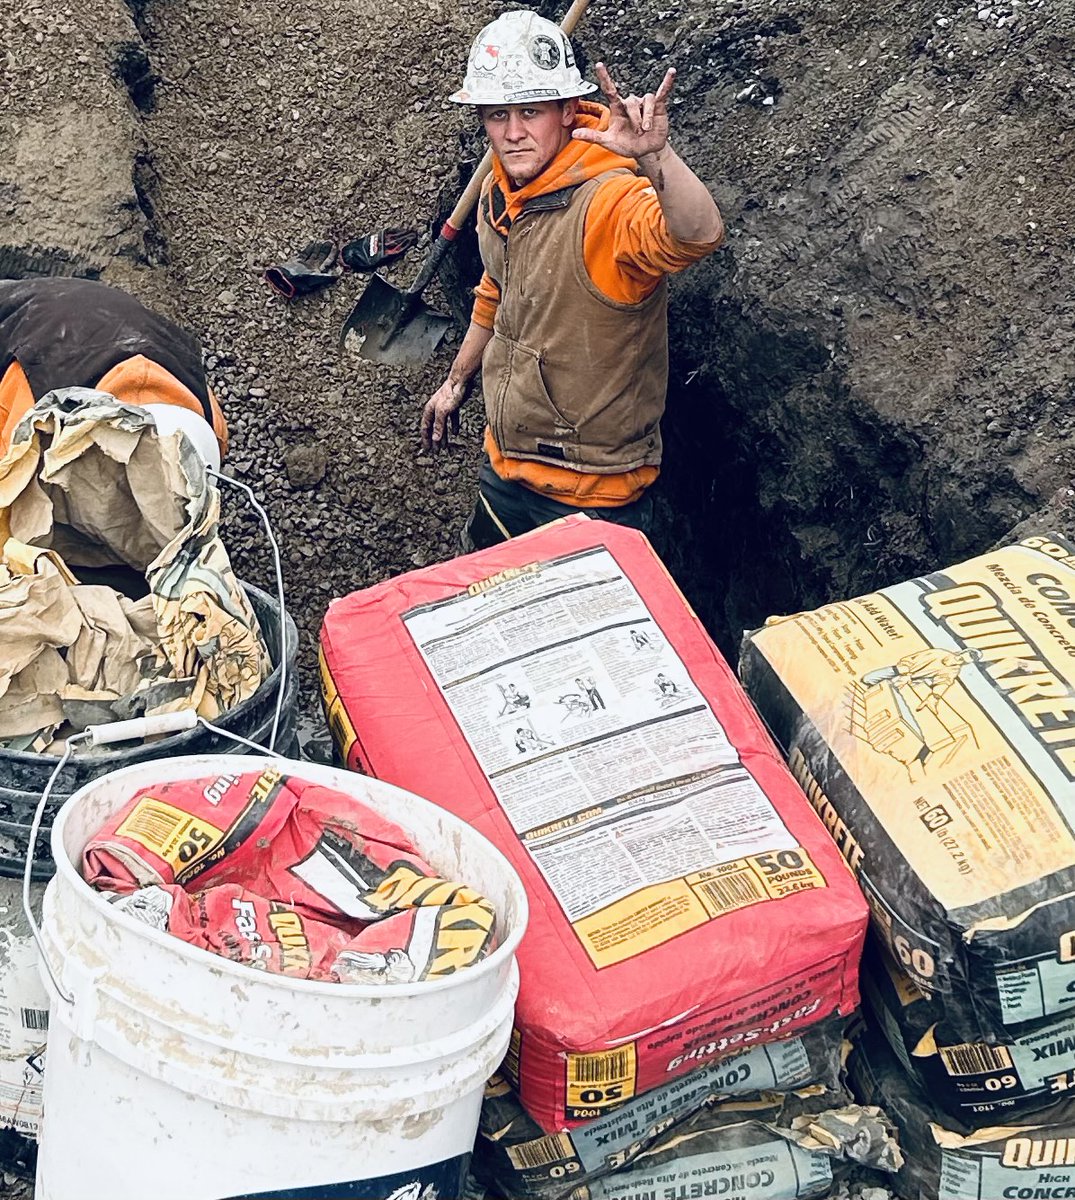 @LIUNA members don't just show up. Our members show up and get the work done! Shoutout to Brother Dylan and Brother Brandon for repping their Laborers Rising gear. Keep spreading the message!
#LIUNA #LaborersRising #LIUNANW #mtlabor #mtpol